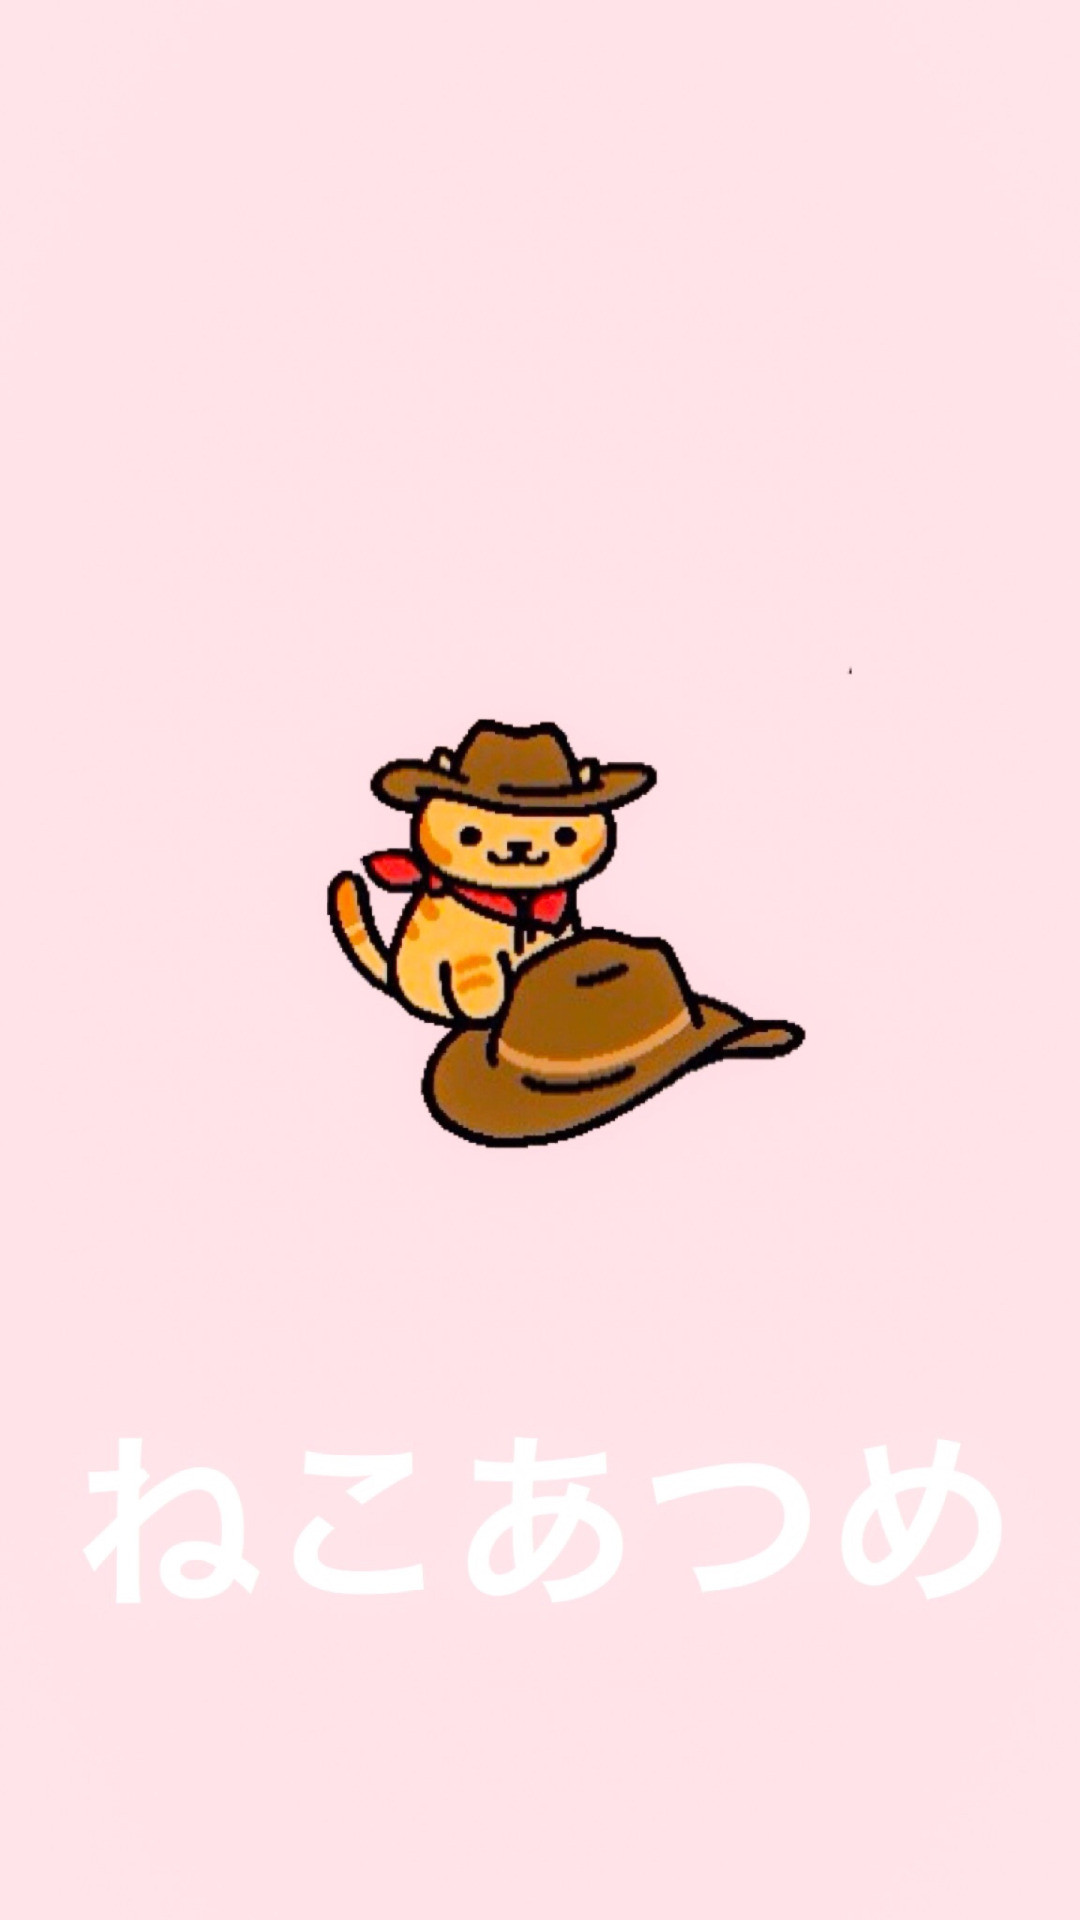 1080x1920 Cute Kitty In Hat 1080. Tap to see more Neko Atsume the cat wallpapers,